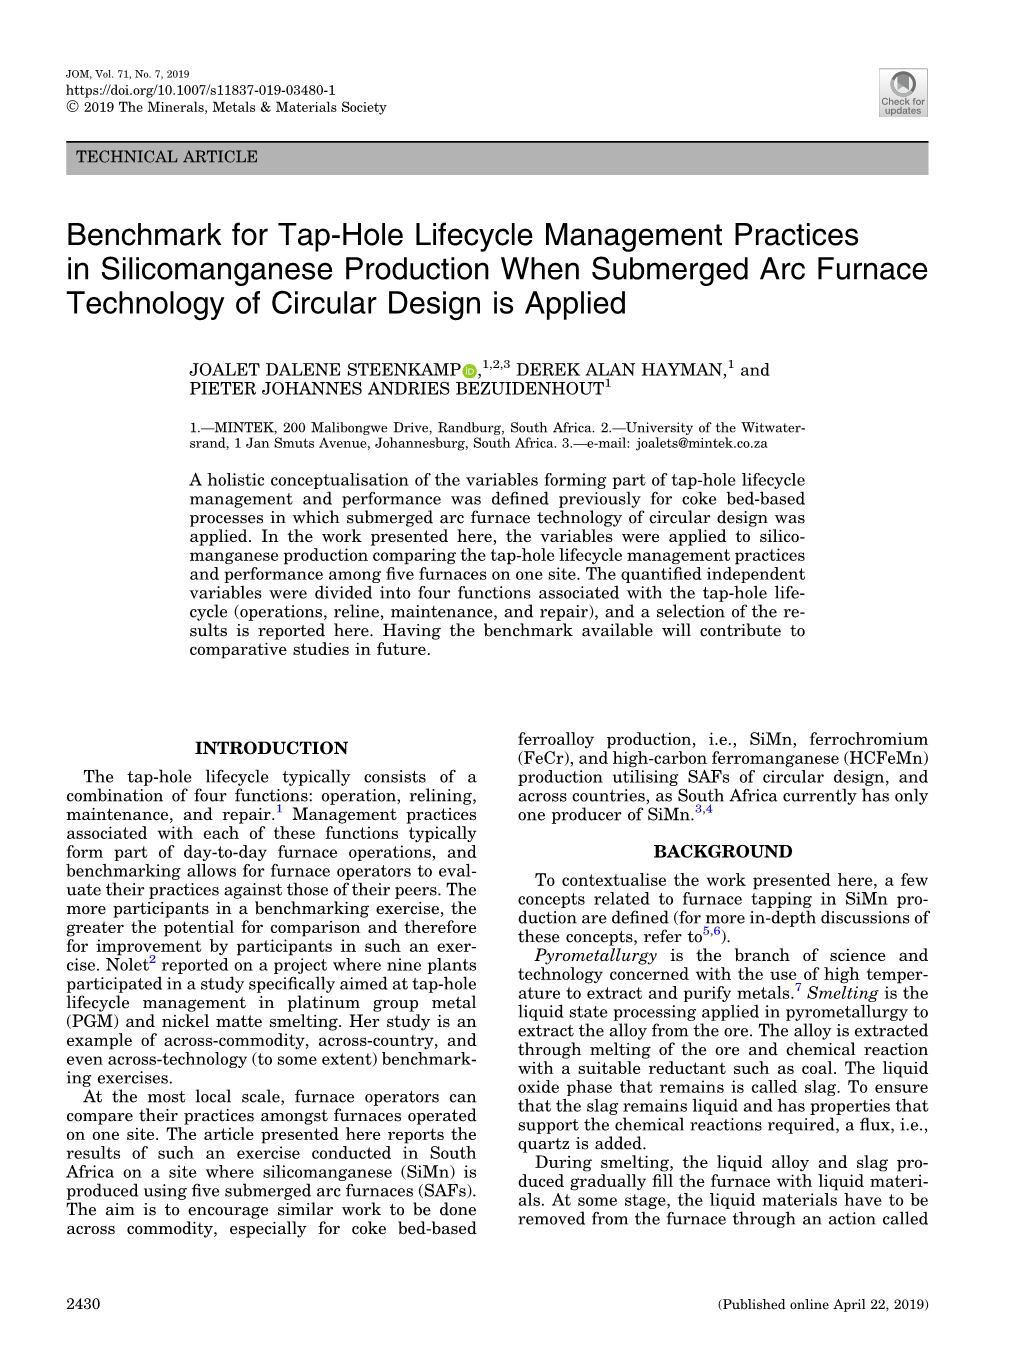 Benchmark for Tap-Hole Lifecycle Management Practices in Silicomanganese Production When Submerged Arc Furnace Technology of Circular Design Is Applied